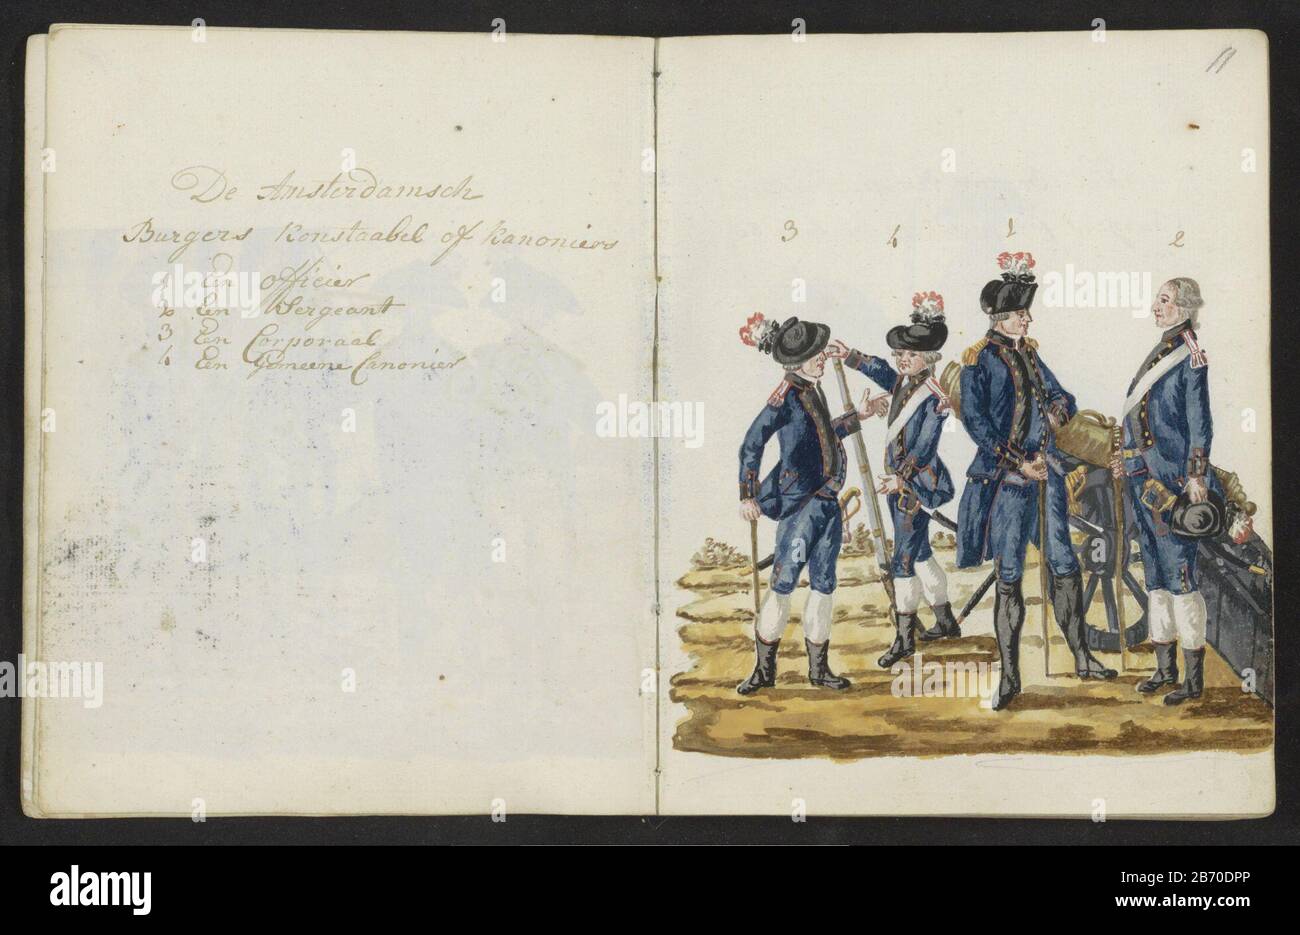 Konstabels of kanonniers van het Amsterdamse exercitiegenootschap in 1783-1787 De Amsterdamsch Burgers Konstaabel of kanoniers (titel op object) The uniforms of constables or gunners of the Amsterdam association exercise. Part of the second chapter on the new Amsterdam militia between 1783-1787. In the sketch with color drawings of the uniforms worn by military personnel and members of the schutterij from the period 1770 to 1795-1796. Manufacturer :  draftsman: S.G. Cast Insert preparation: Amsterdam Date: 1795 Physical characteristics: pen in brown ink color material: paper Technique: writing Stock Photo